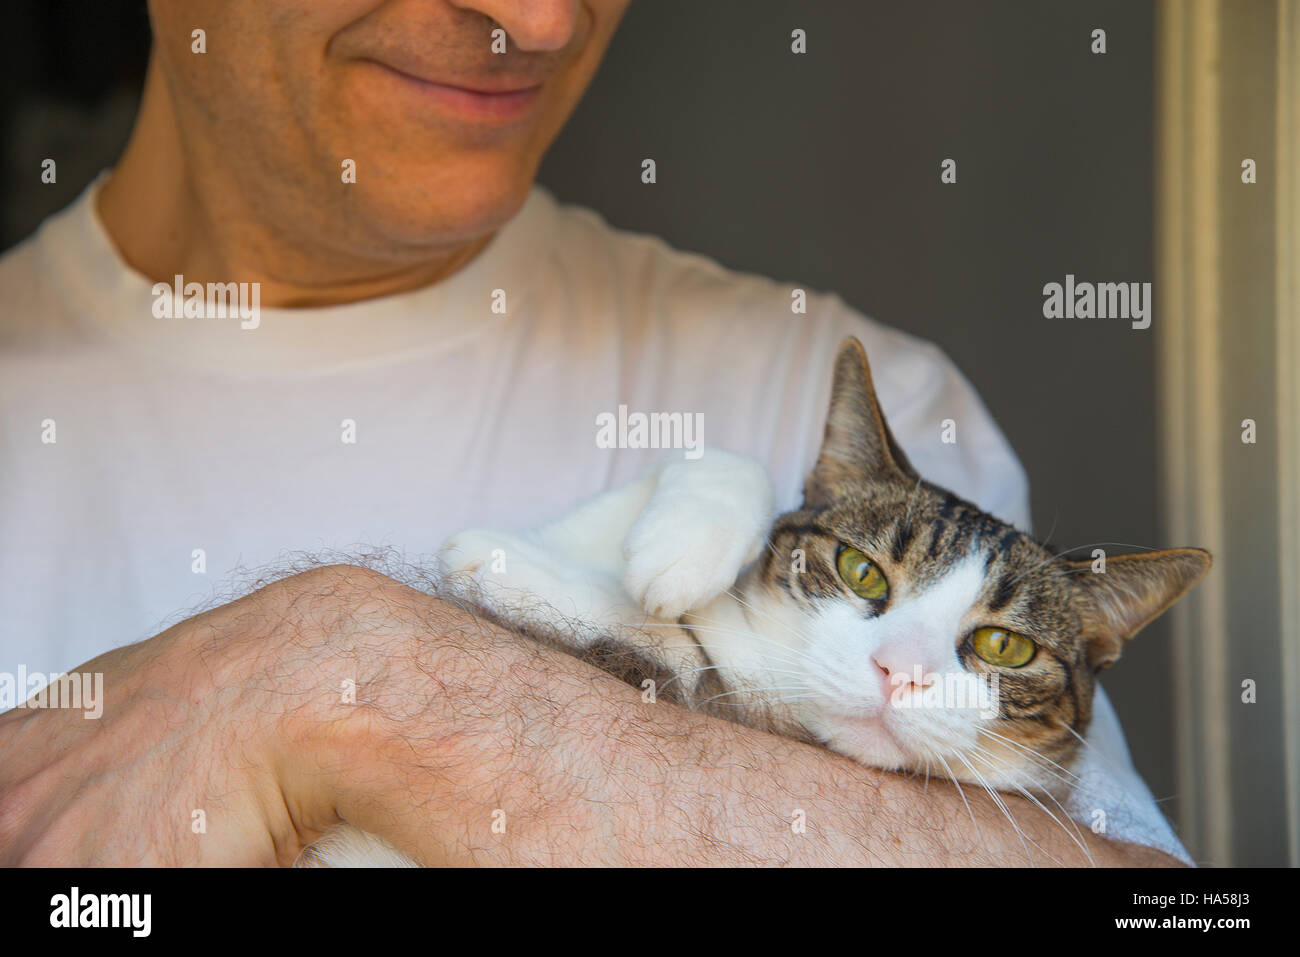 Man holding a cat in his arms. Close view. Stock Photo